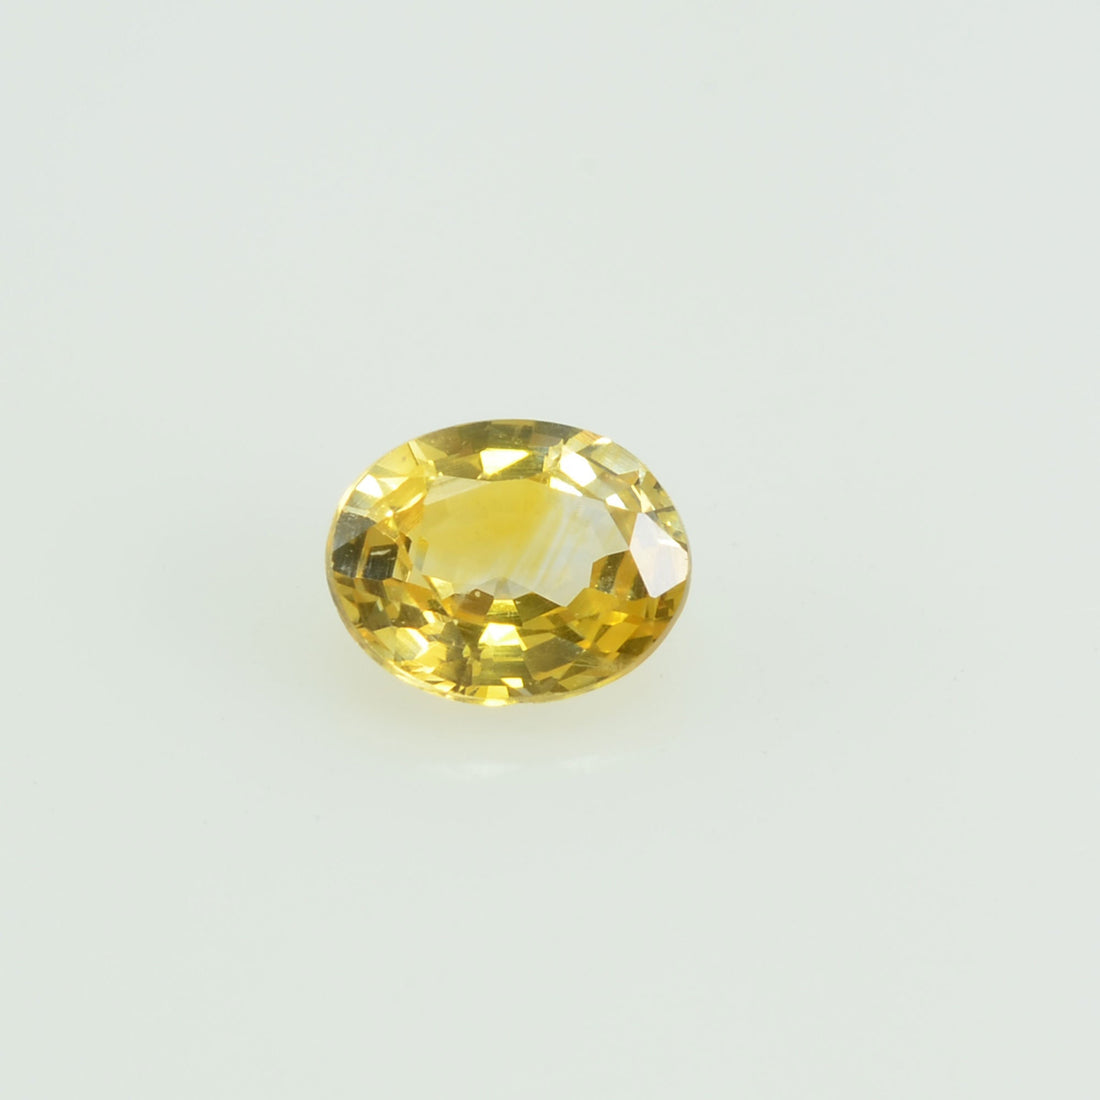 Natural Yellow Sapphire Loose Gemstone Oval Cut